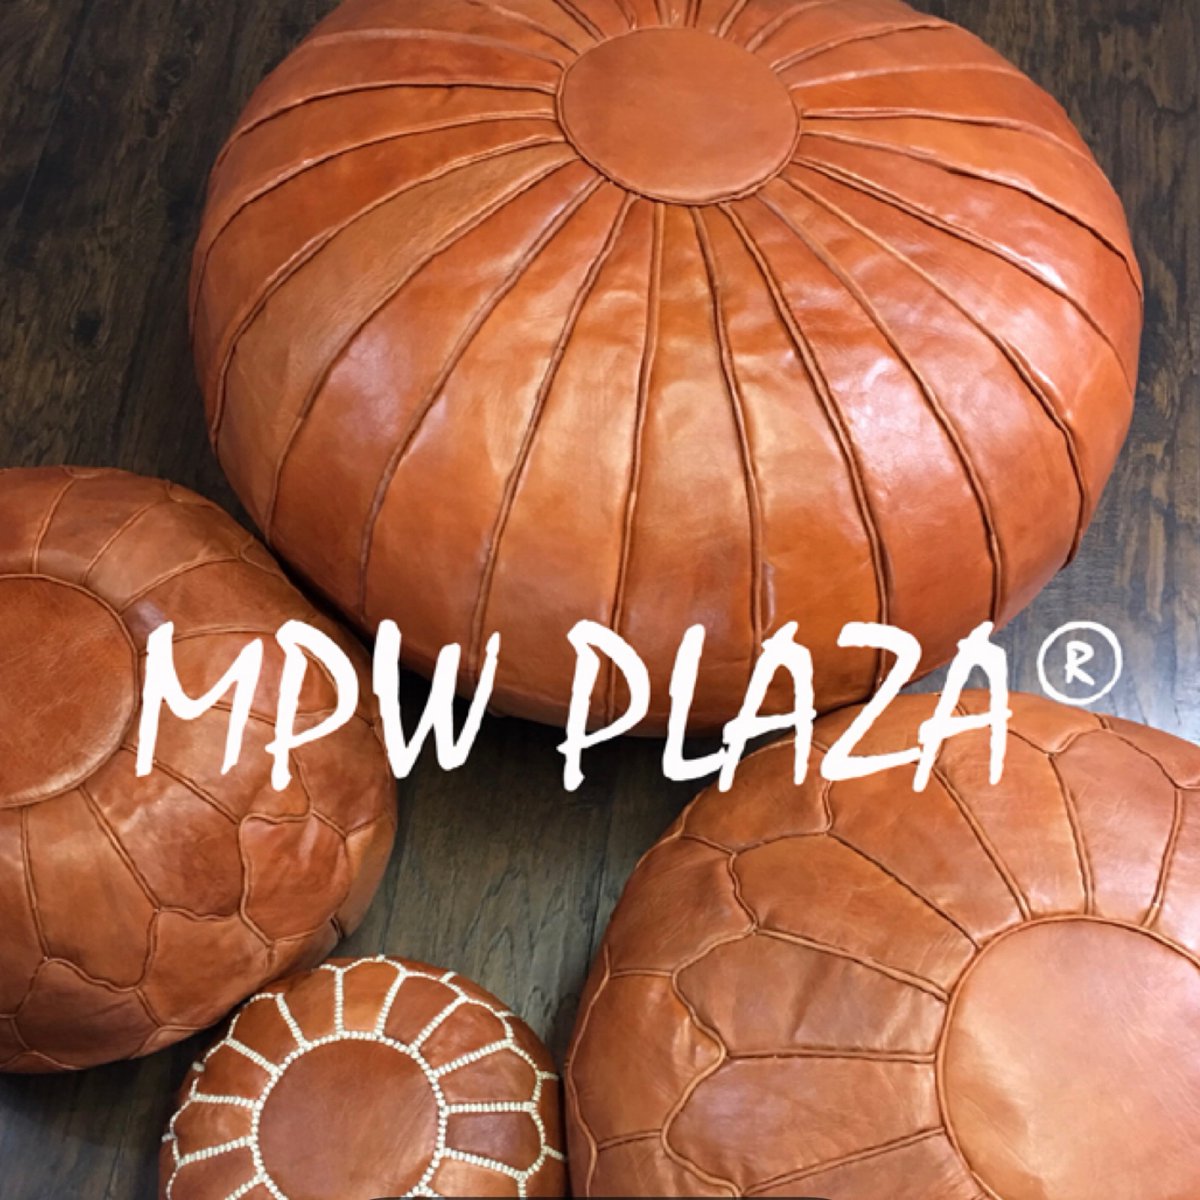 🩸 Treat yourself to a Premium MPW Plaza Moroccan Pouf 🌺  ships from USA 🌹
#luxuryhouses #luxurylifestyles #luxurygirl #luxurylivingroom #luxurystyle #luxuryapartments #luxuryshopping #luxuryshoes #luxurybags #luxurycollection #luxurycondos #luxurymansion #luxuryproperty